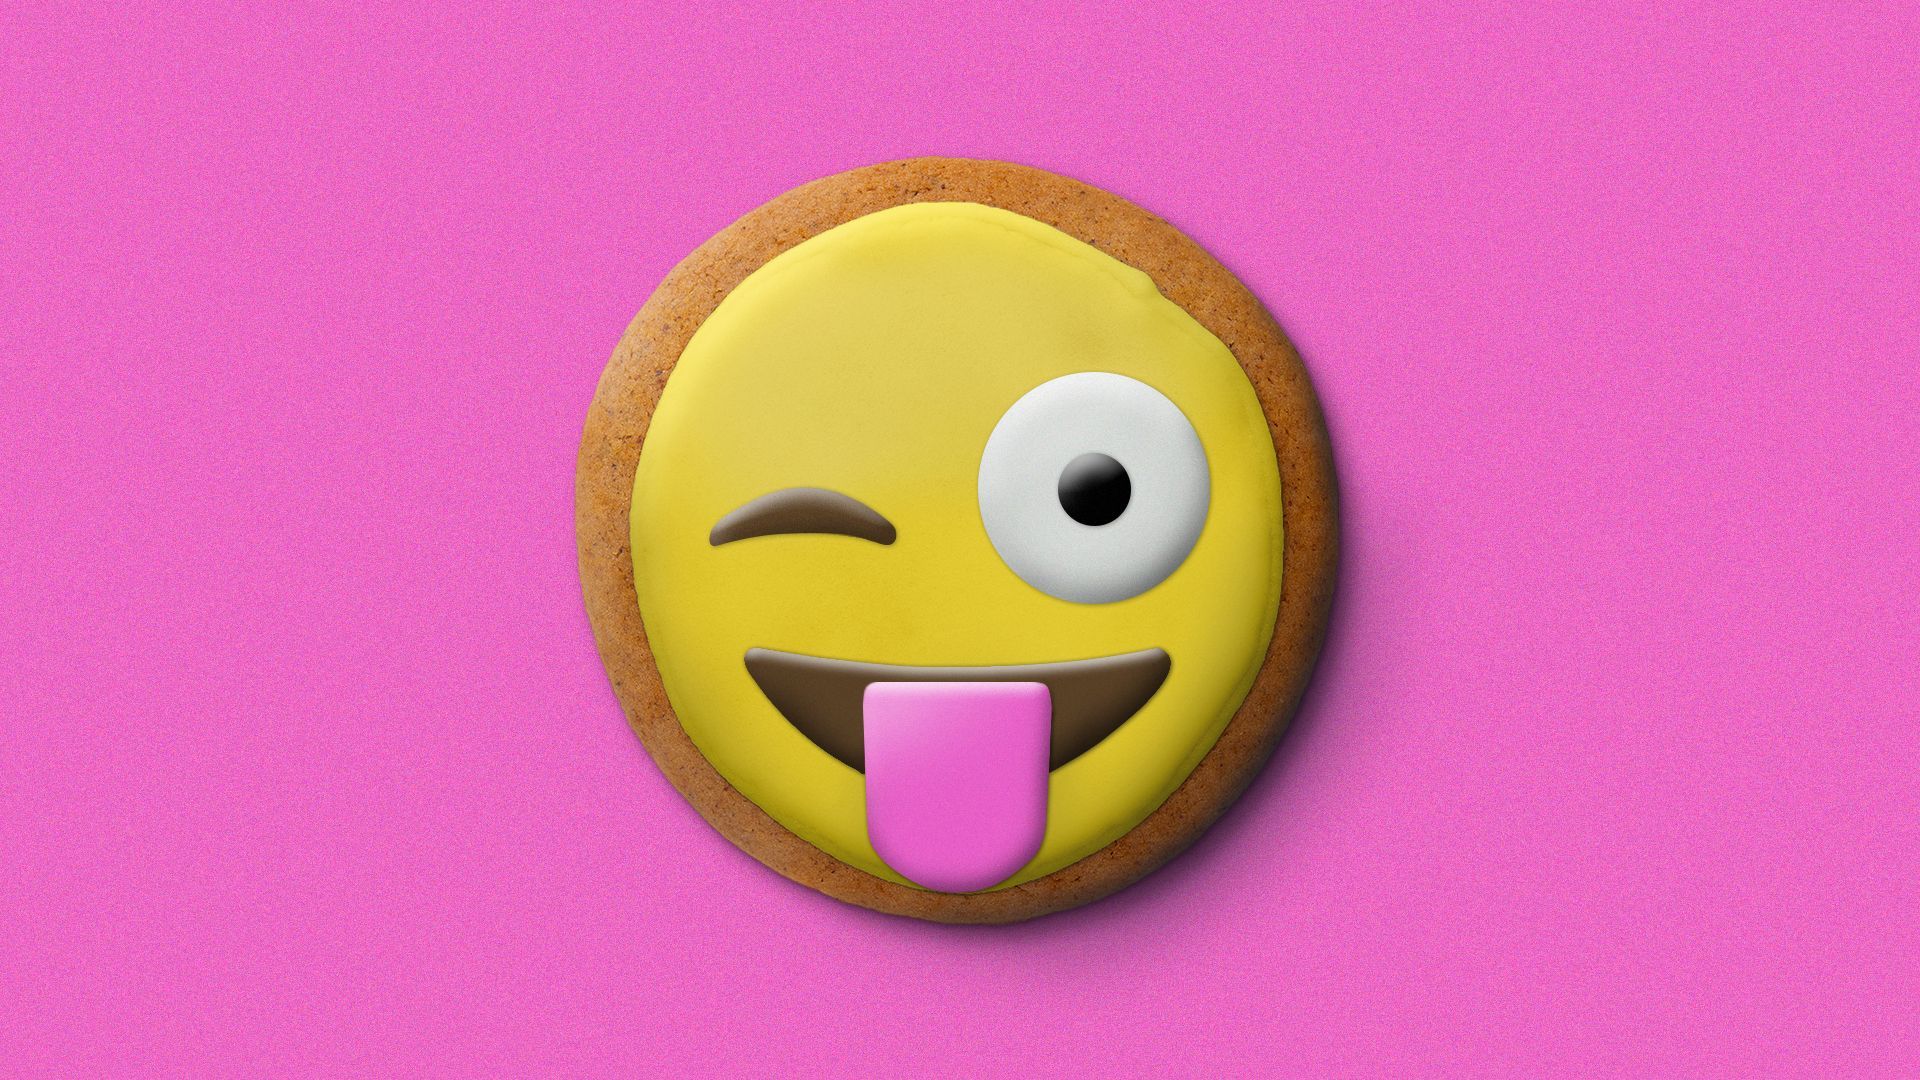 an illustration of a sugar cookie decorated with frosting forming a winking emoji with its tongue sticking out